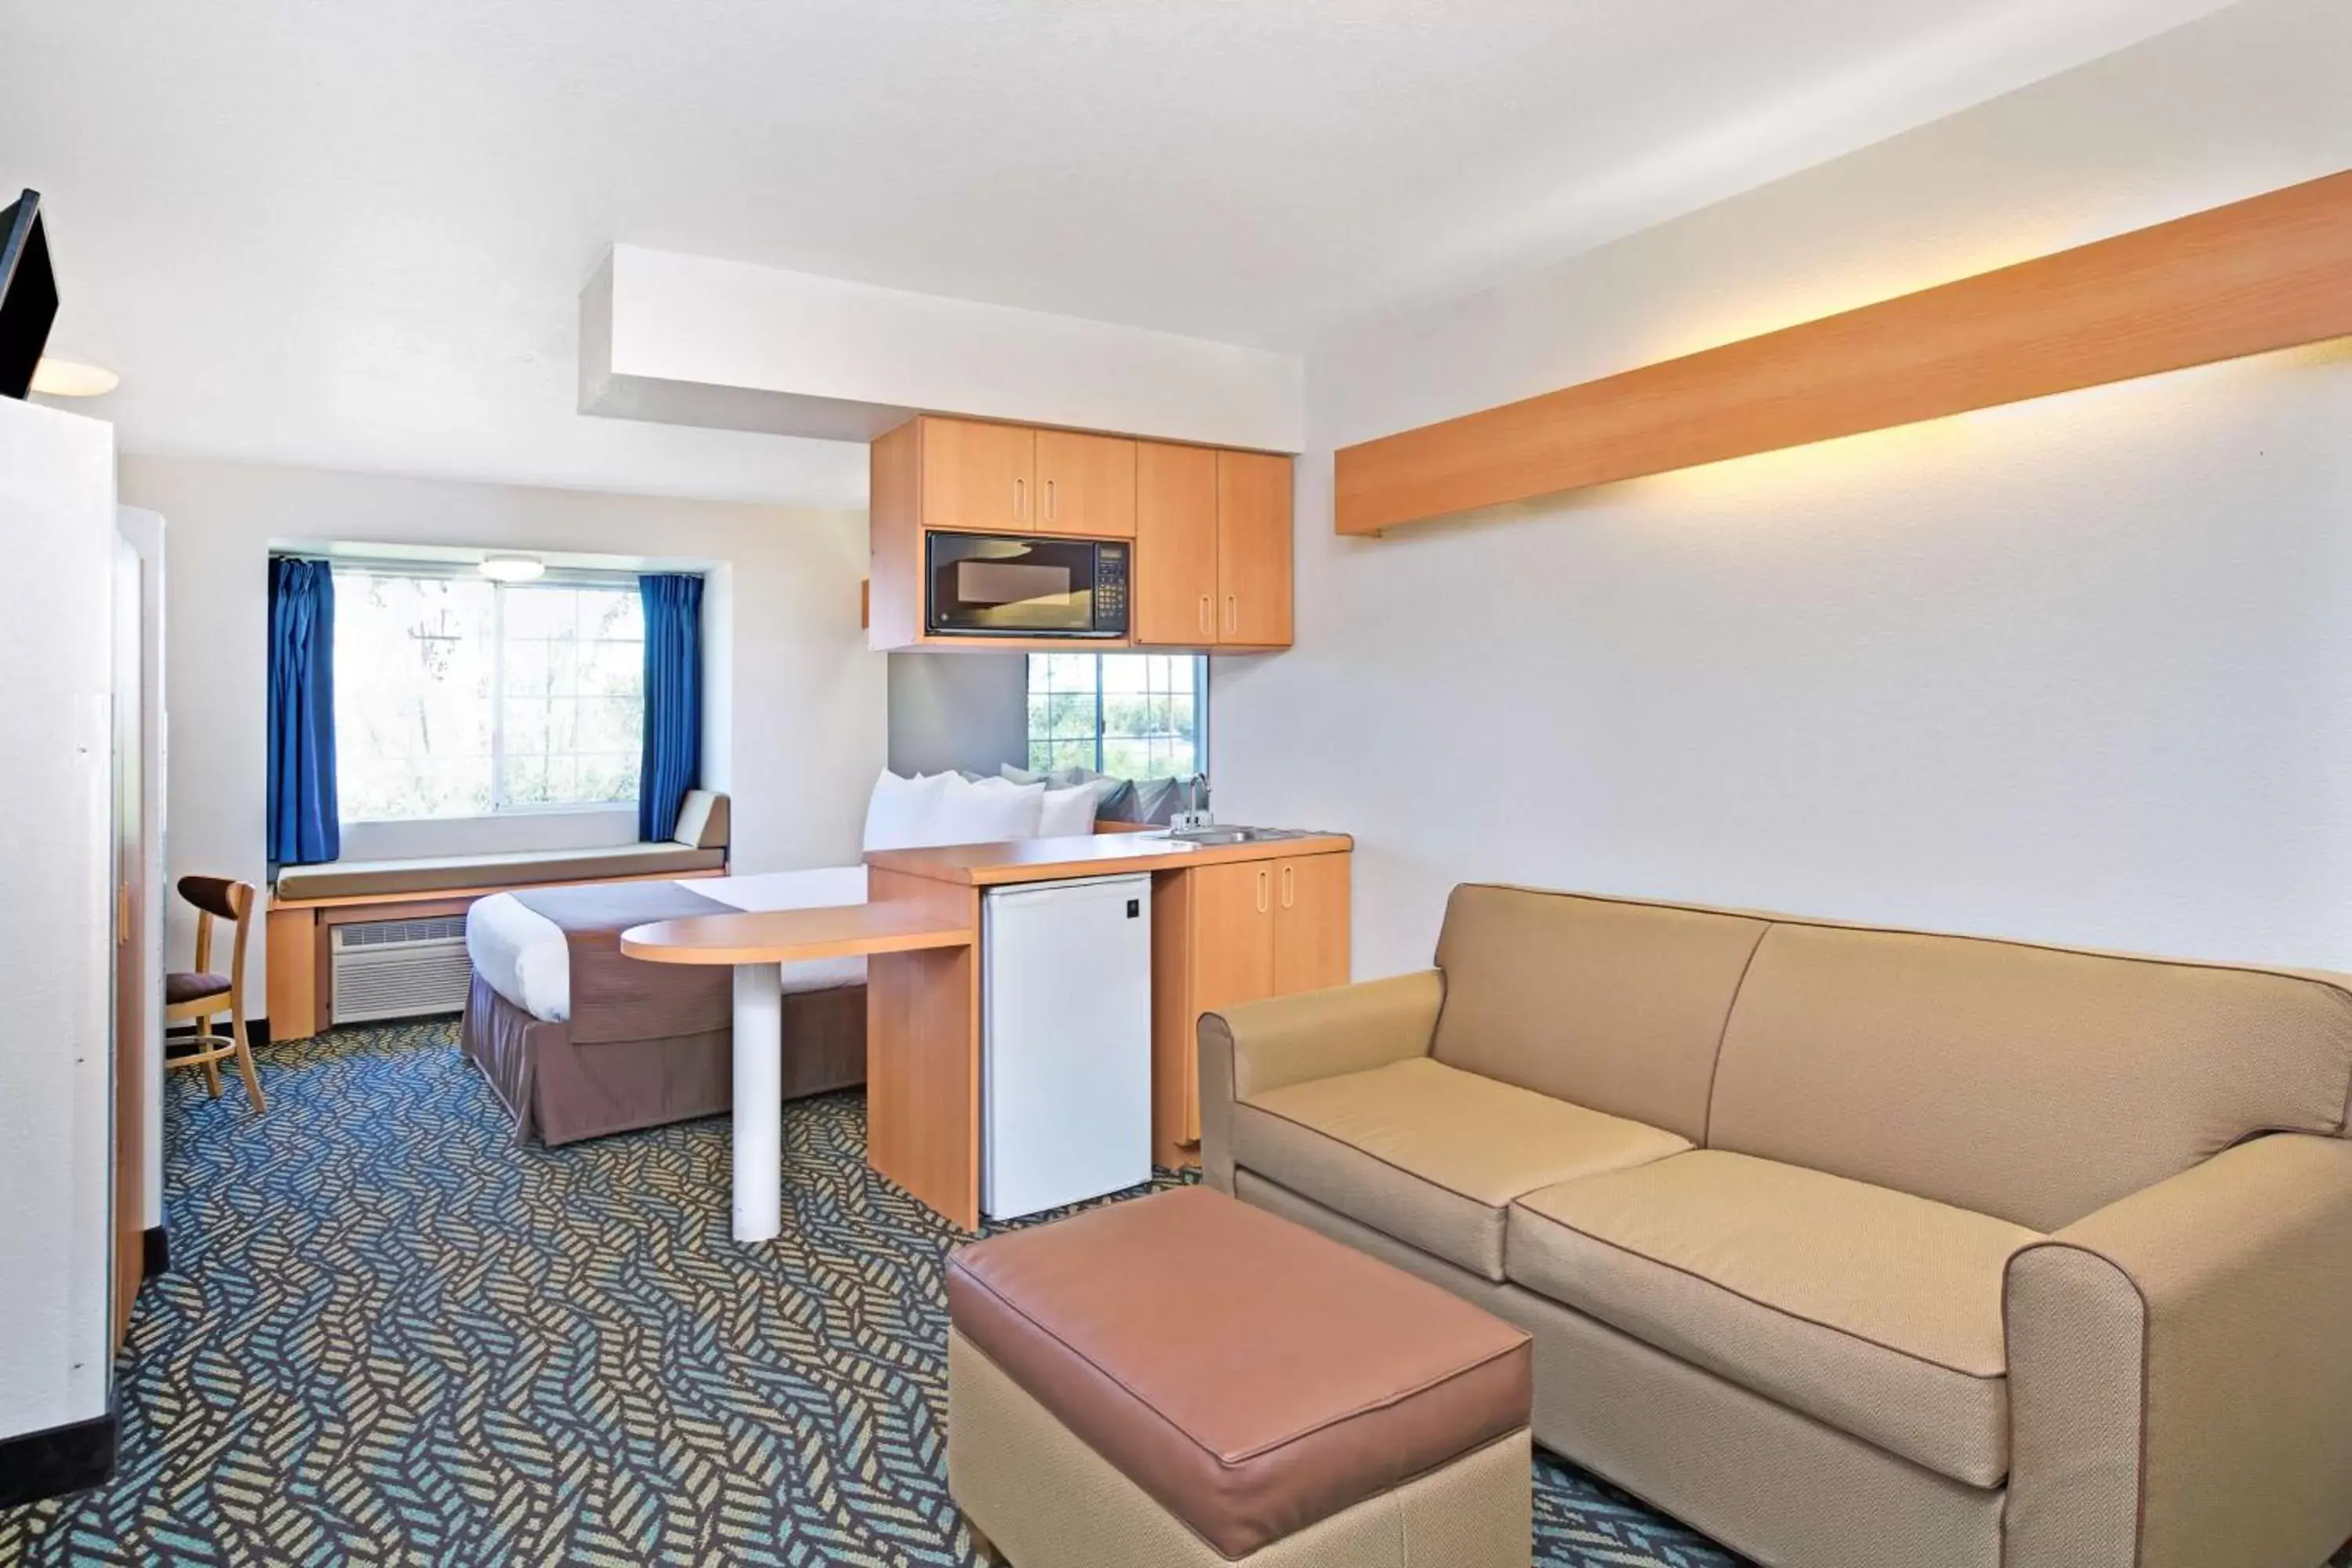 Queen Suite with Sofa-bed - Non-Smoking in Microtel Inn & Suites, Morgan Hill